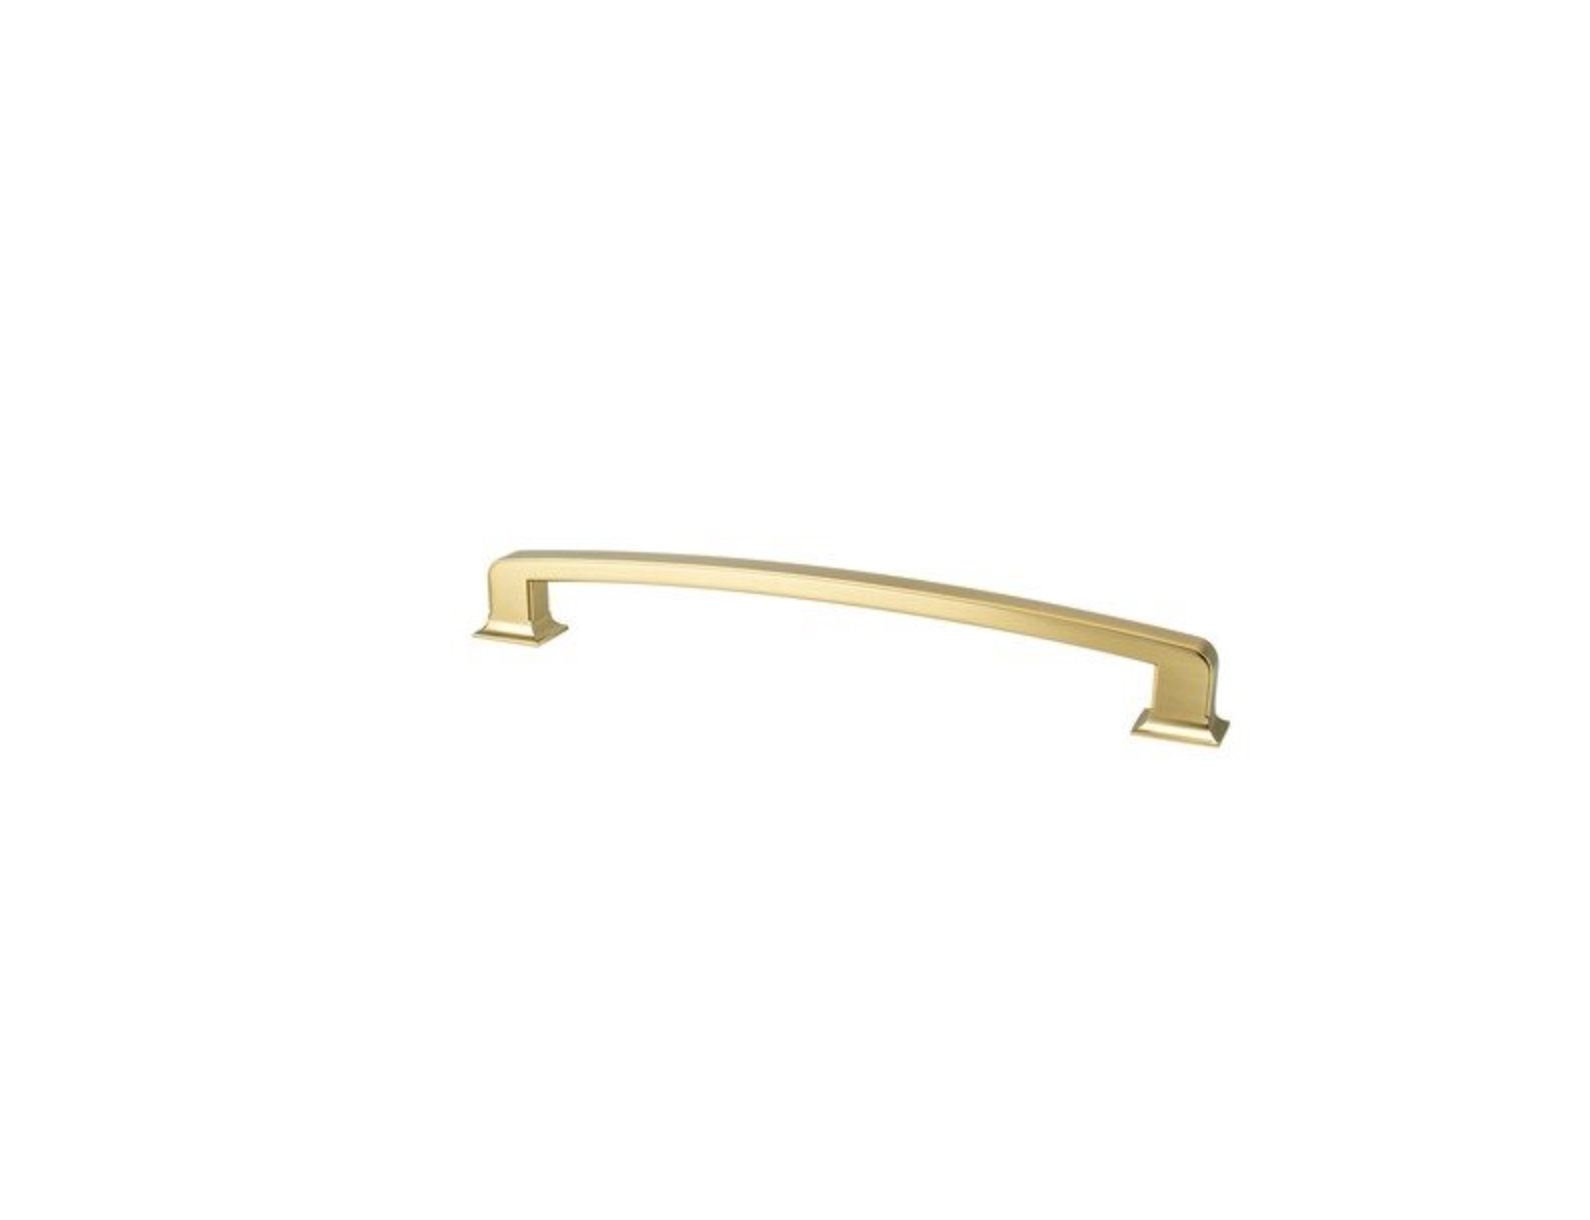 Champagne Bronze "Liana" Drawer Pulls and Knobs for Cabinets and Furniture - Industry Hardware